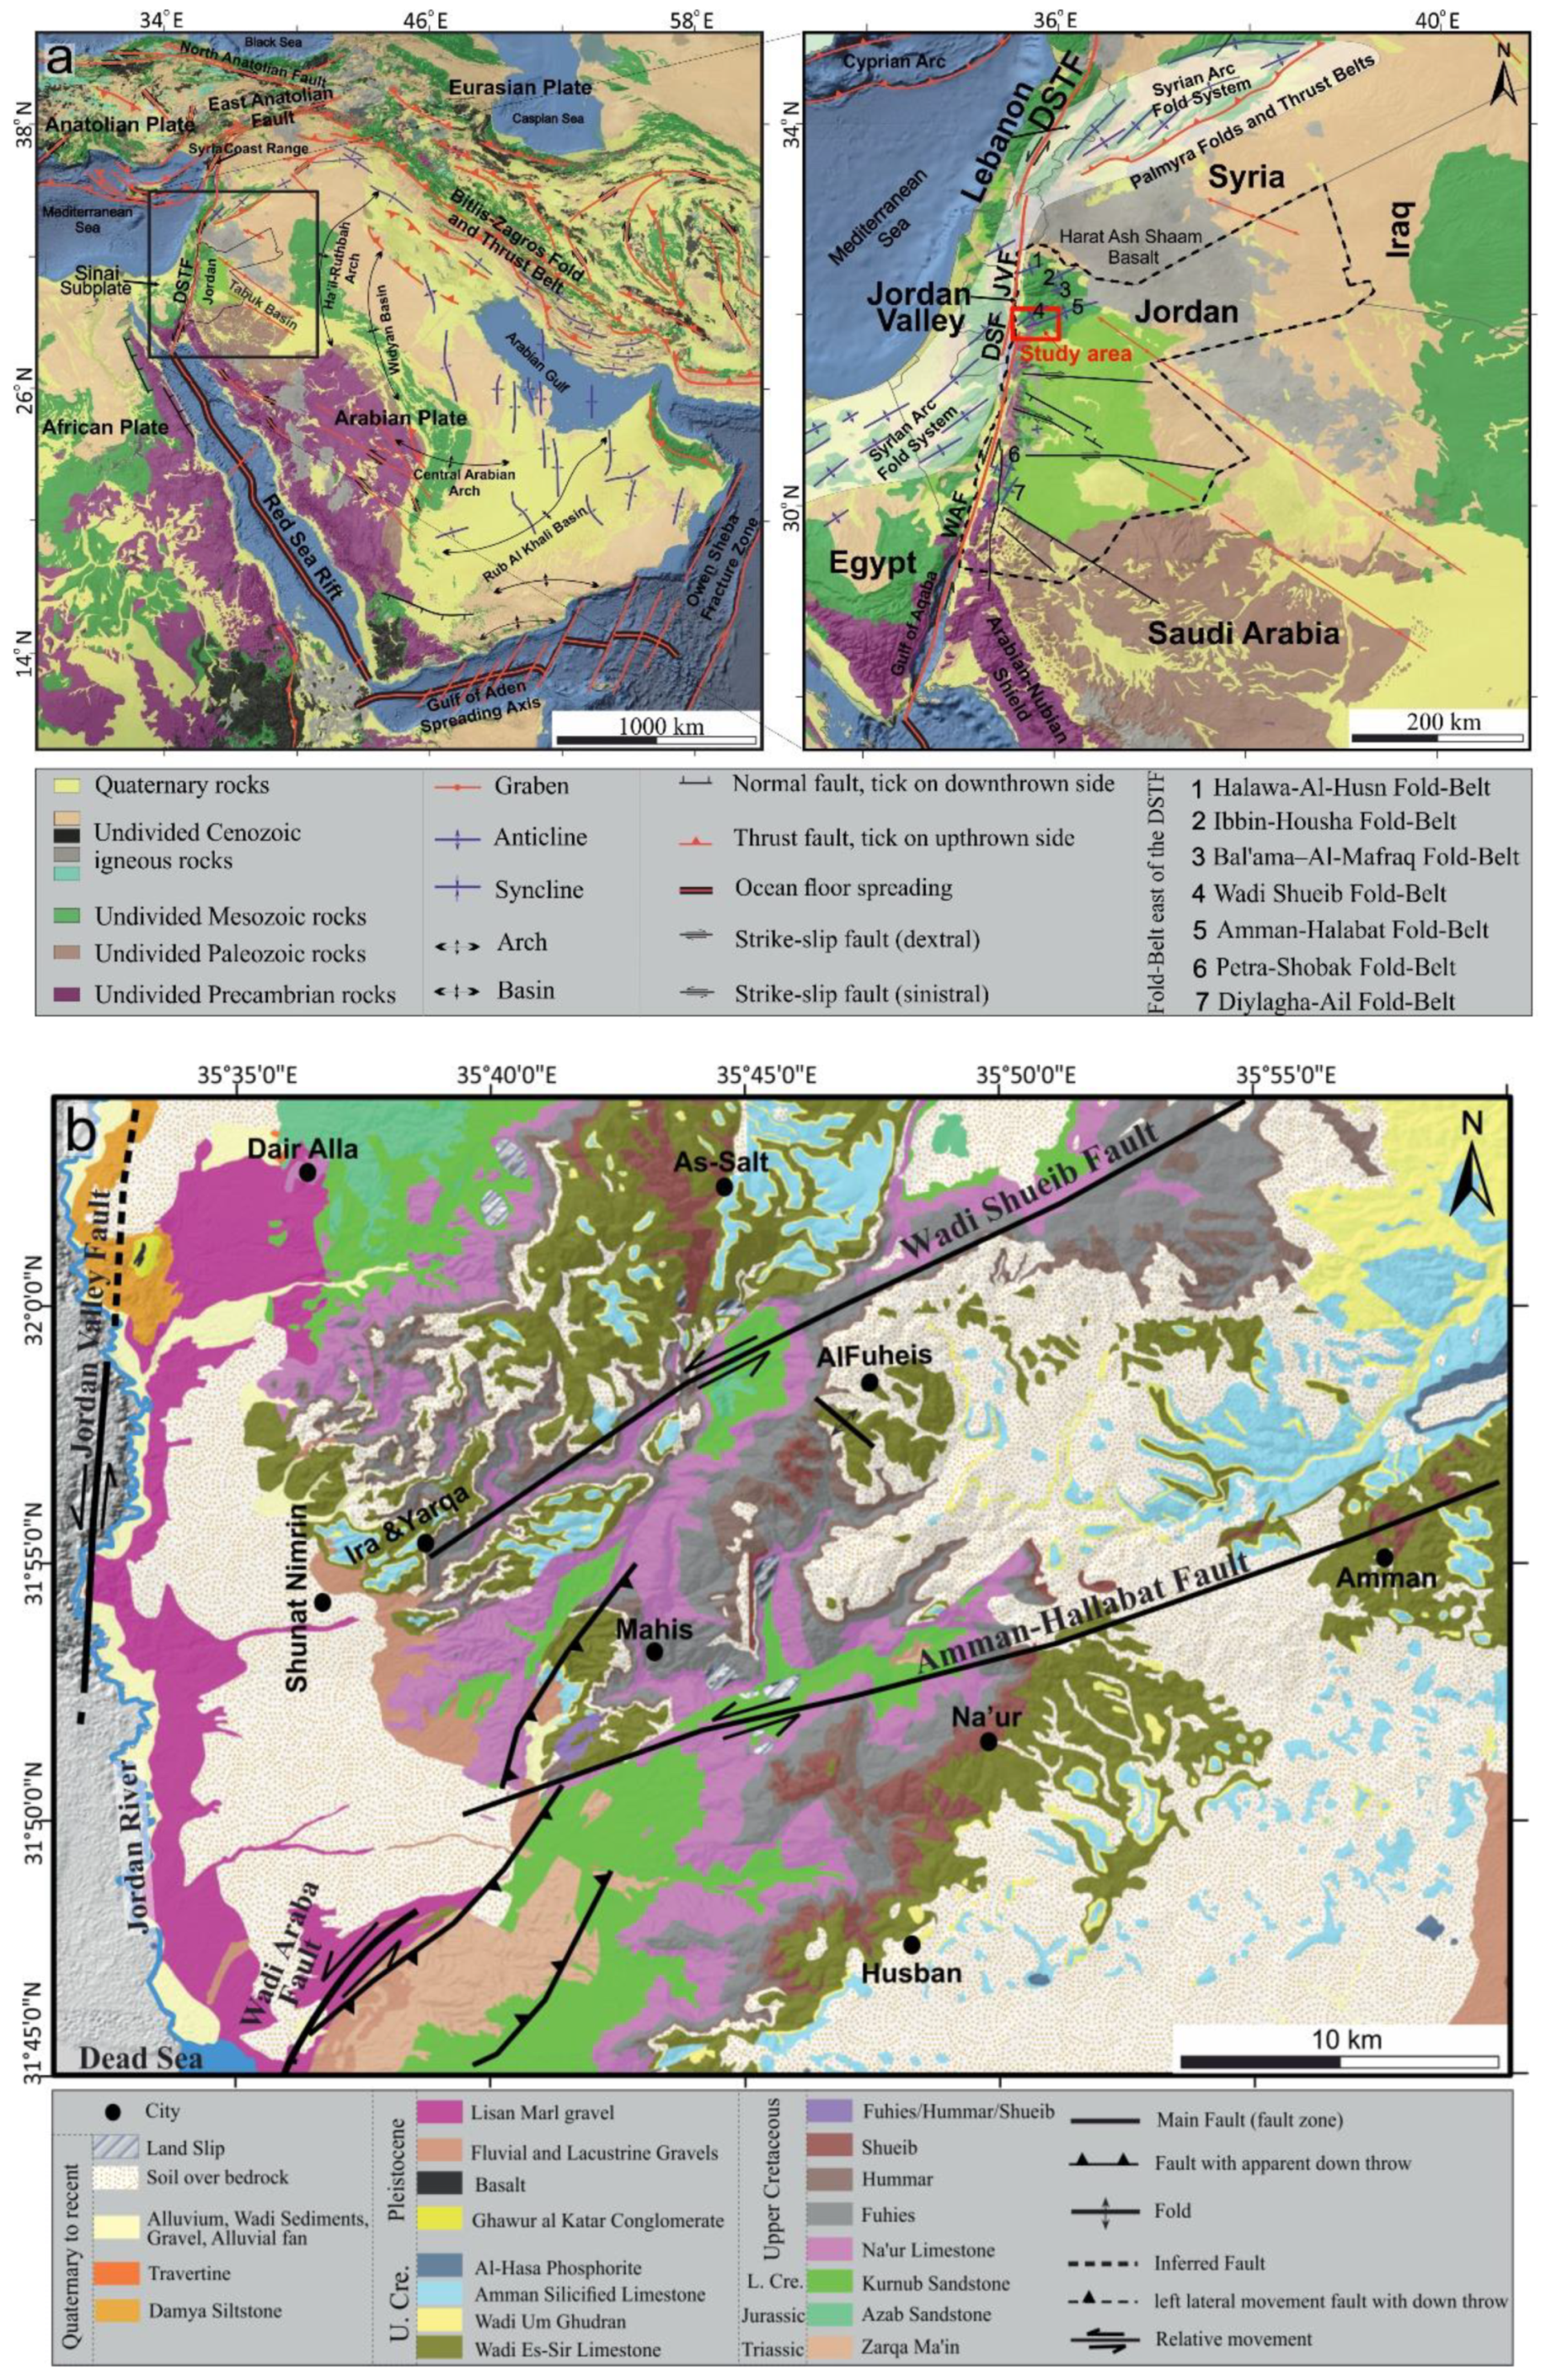 Geosciences | Free Full-Text | New Insights for Understanding the  Structural Deformation Style of the Strike-Slip Regime along the Wadi  Shueib and Amman-Hallabat Structures in Jordan Based on Remote Sensing Data  Analysis